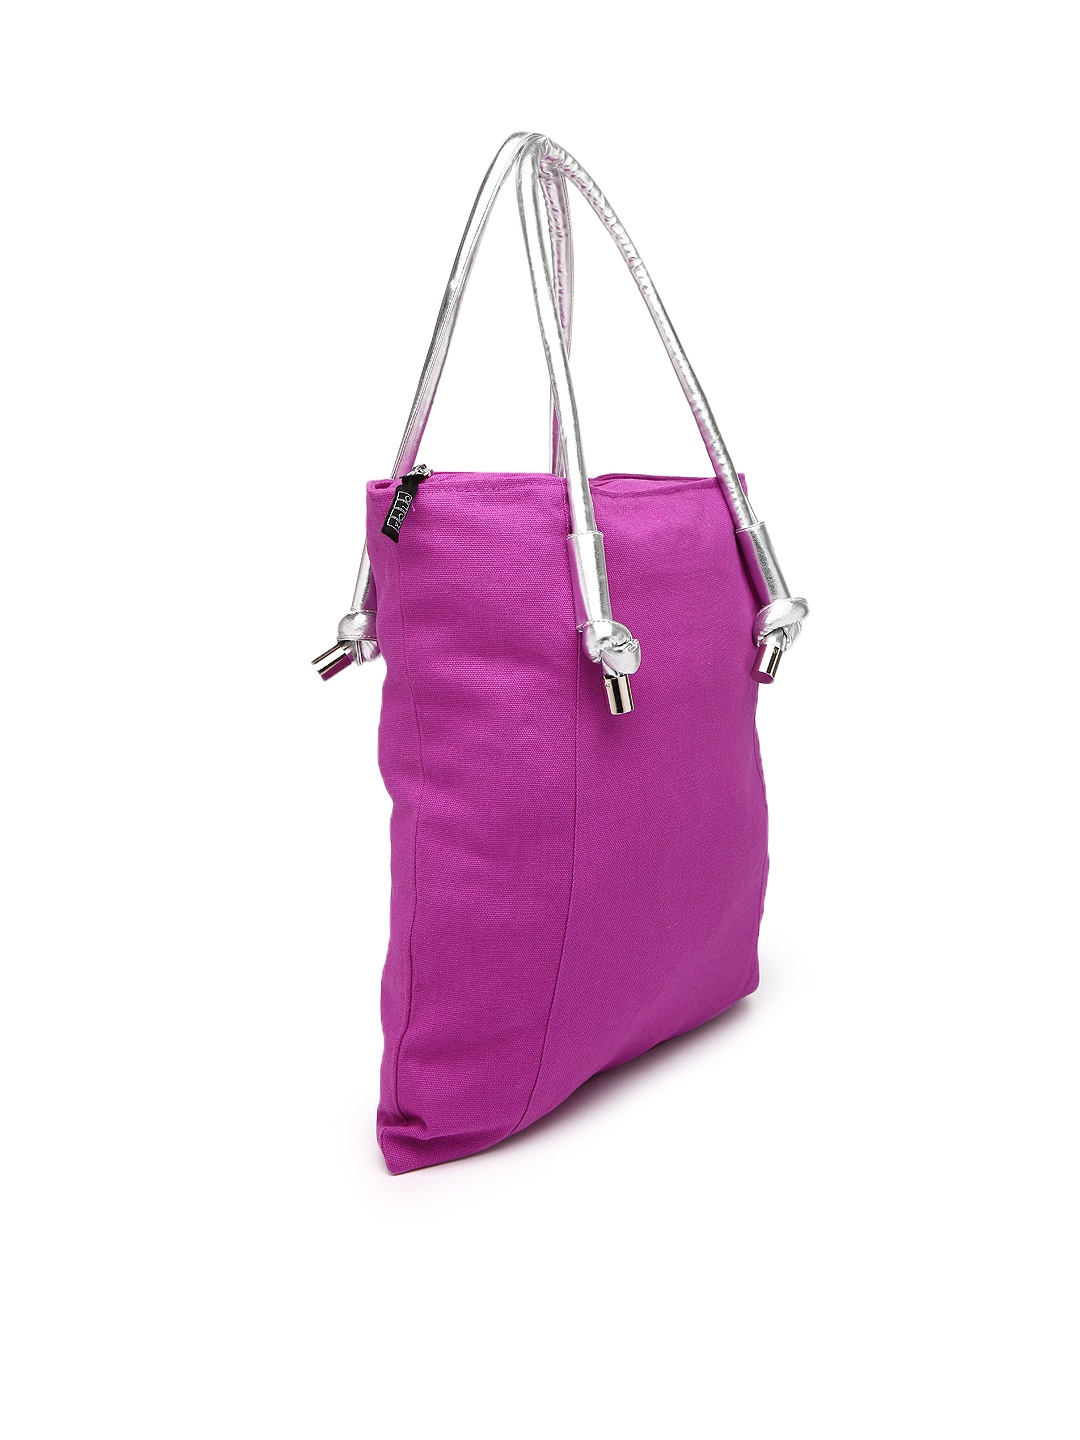 Myntra YOLO Women Magenta Tote Bag 794767 | Buy Myntra YOLO Tote Bags at best price online. All ...